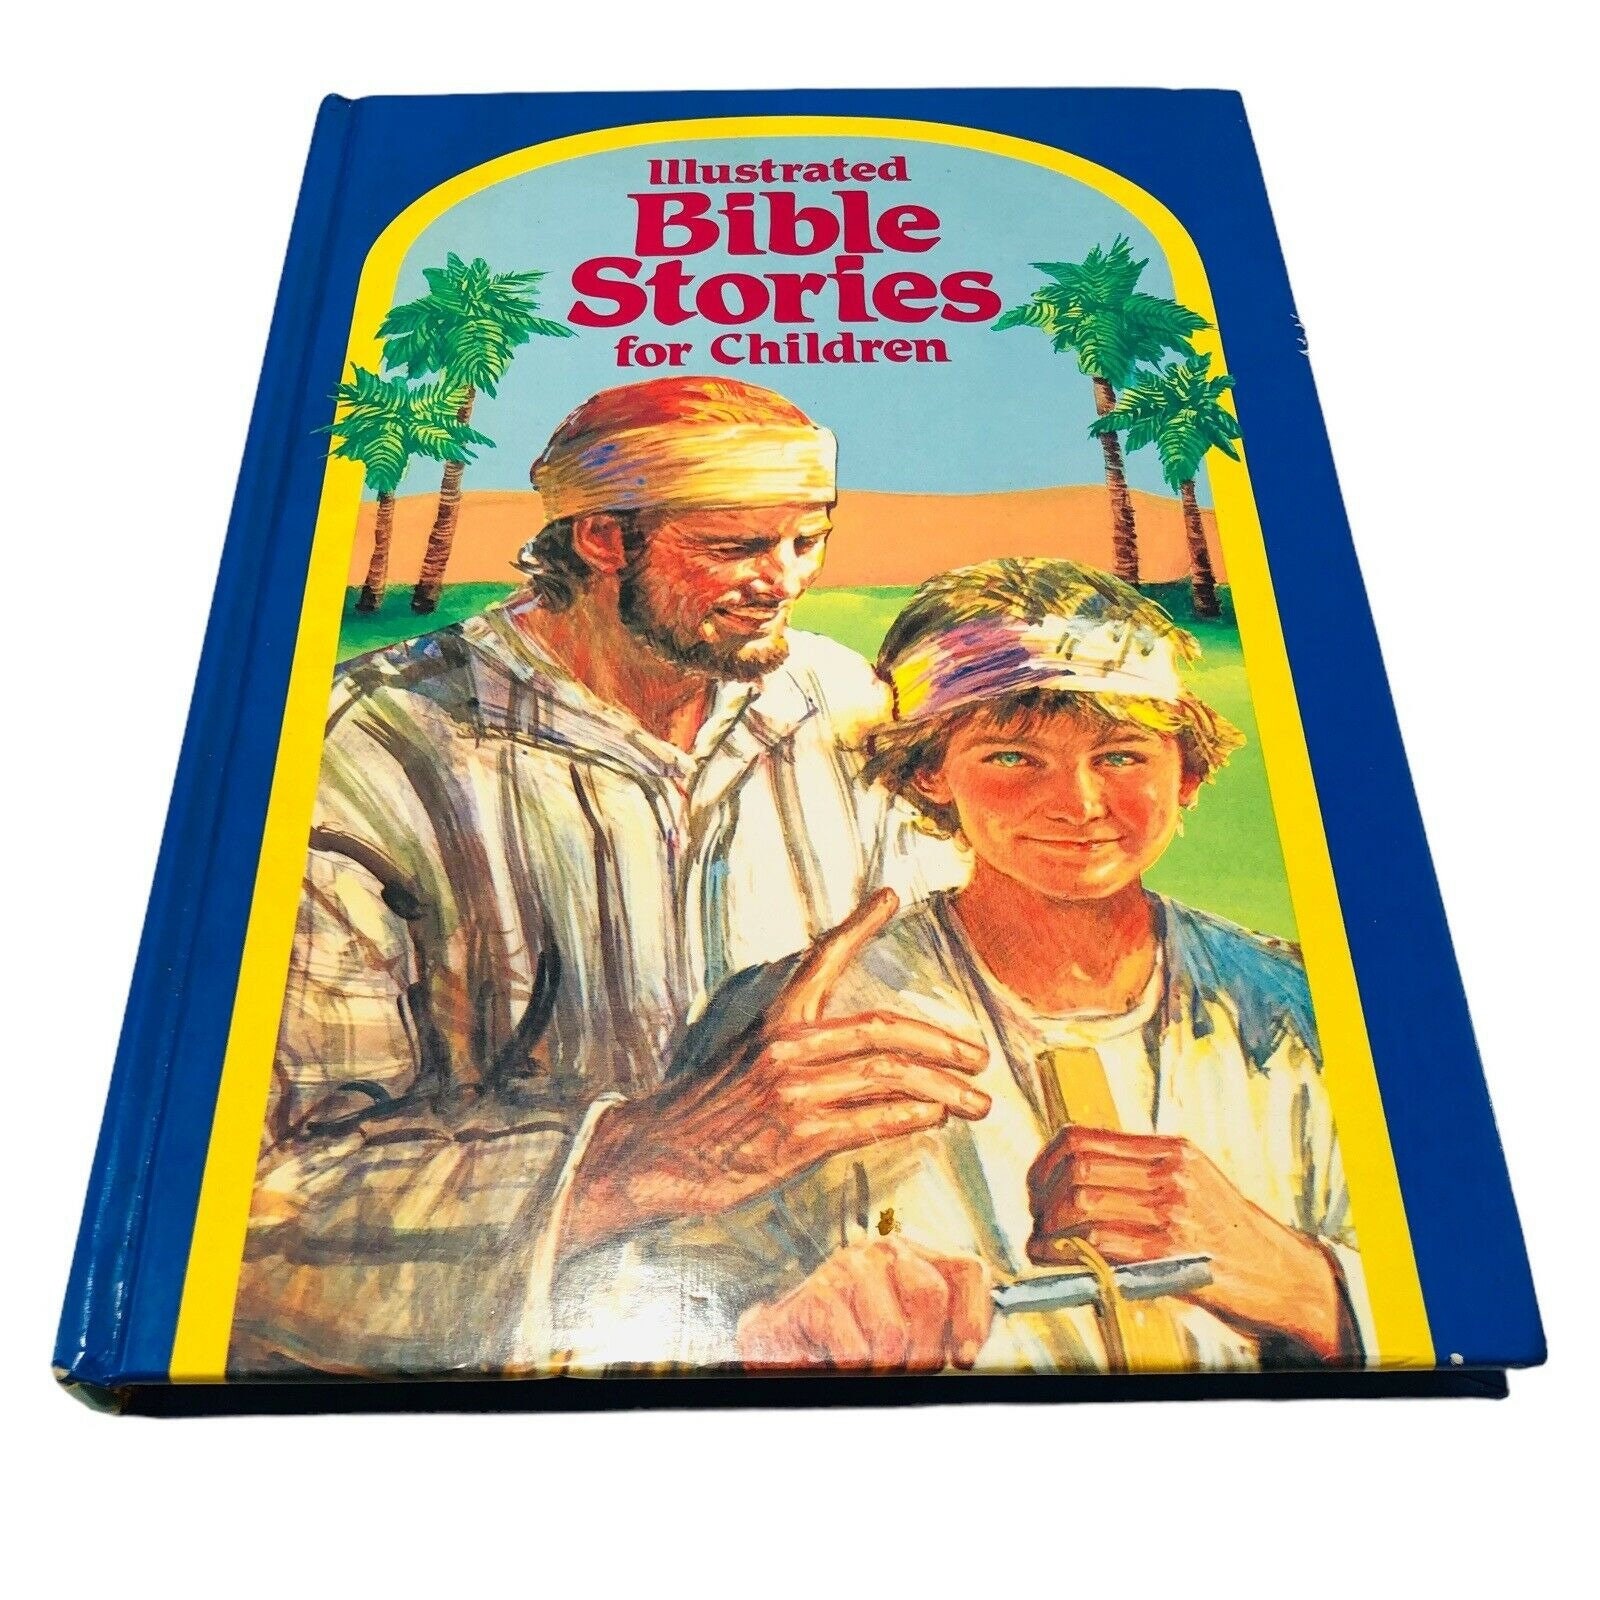 The Bible Made Easy: A Pop-up, Pull-out, Interactive Bible Adventure Alan  and Linda Parry, 1999 